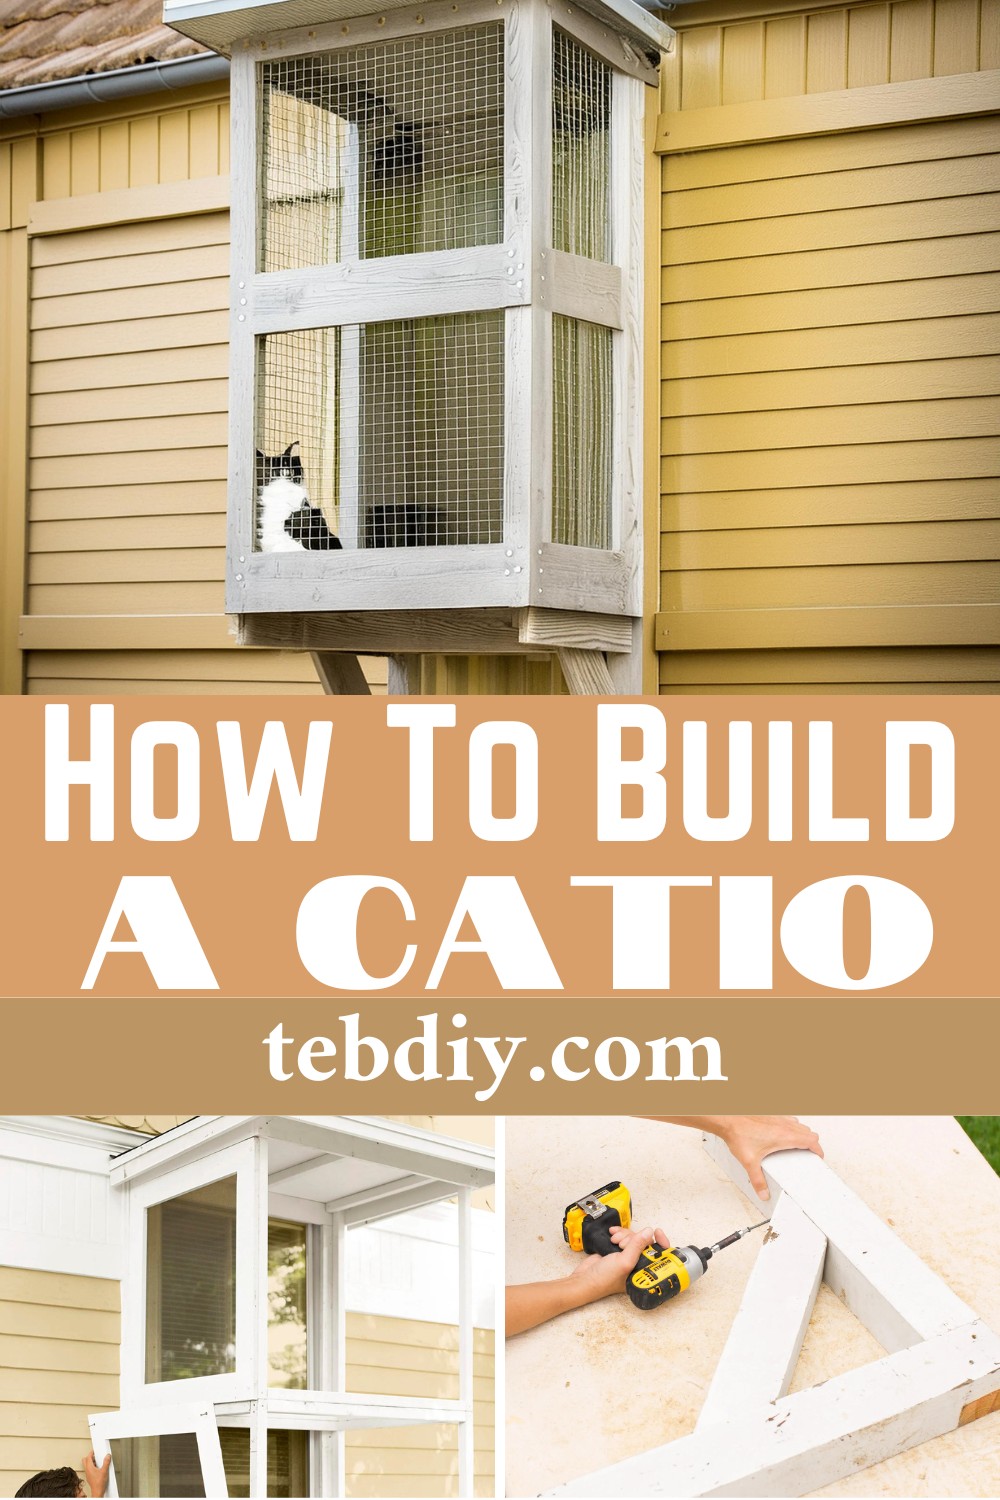 How To Build A Catio For Felines To Play